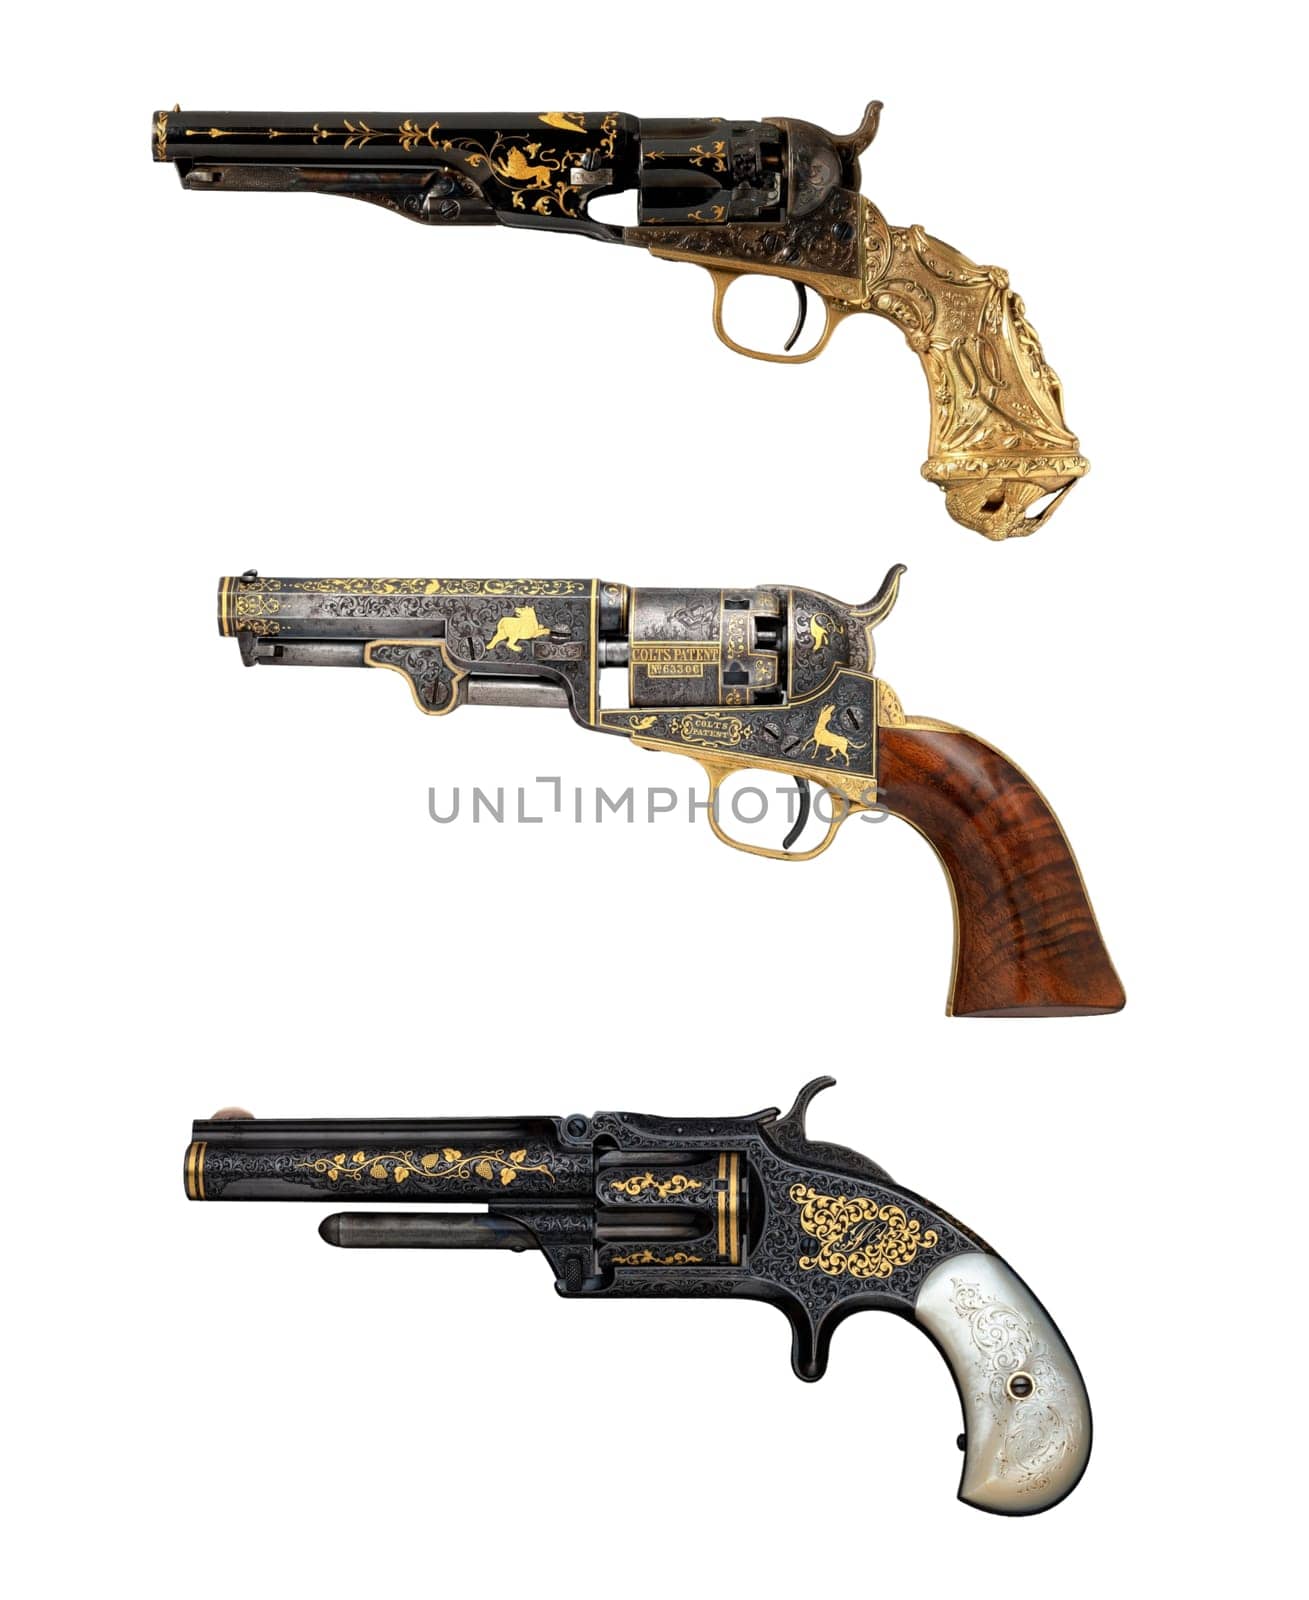 antique, vintage handguns from the 17th century. isolated background